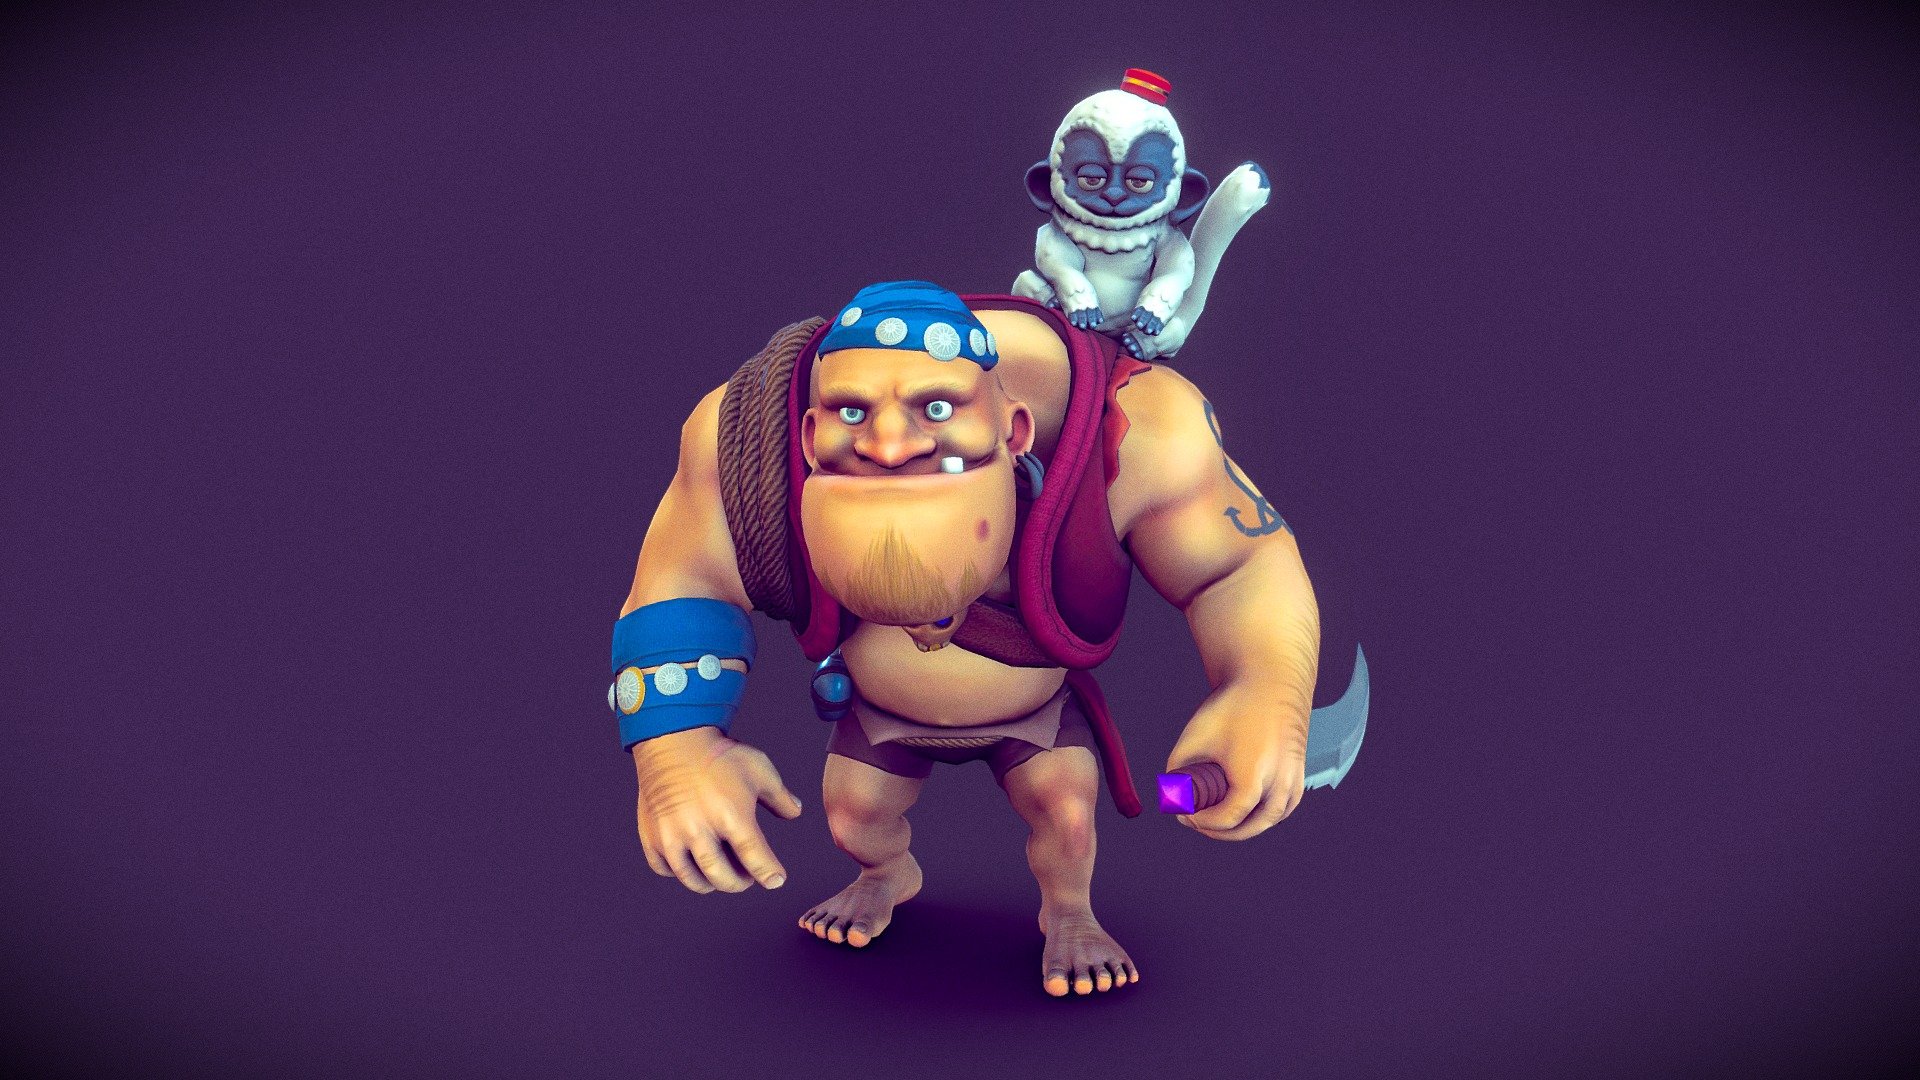 Based on artist M ZM concept: https://mzm.artstation.com/
I was inspiring by his stile and this character. I know i didn't catch all character's emotions but i did my best 3d model